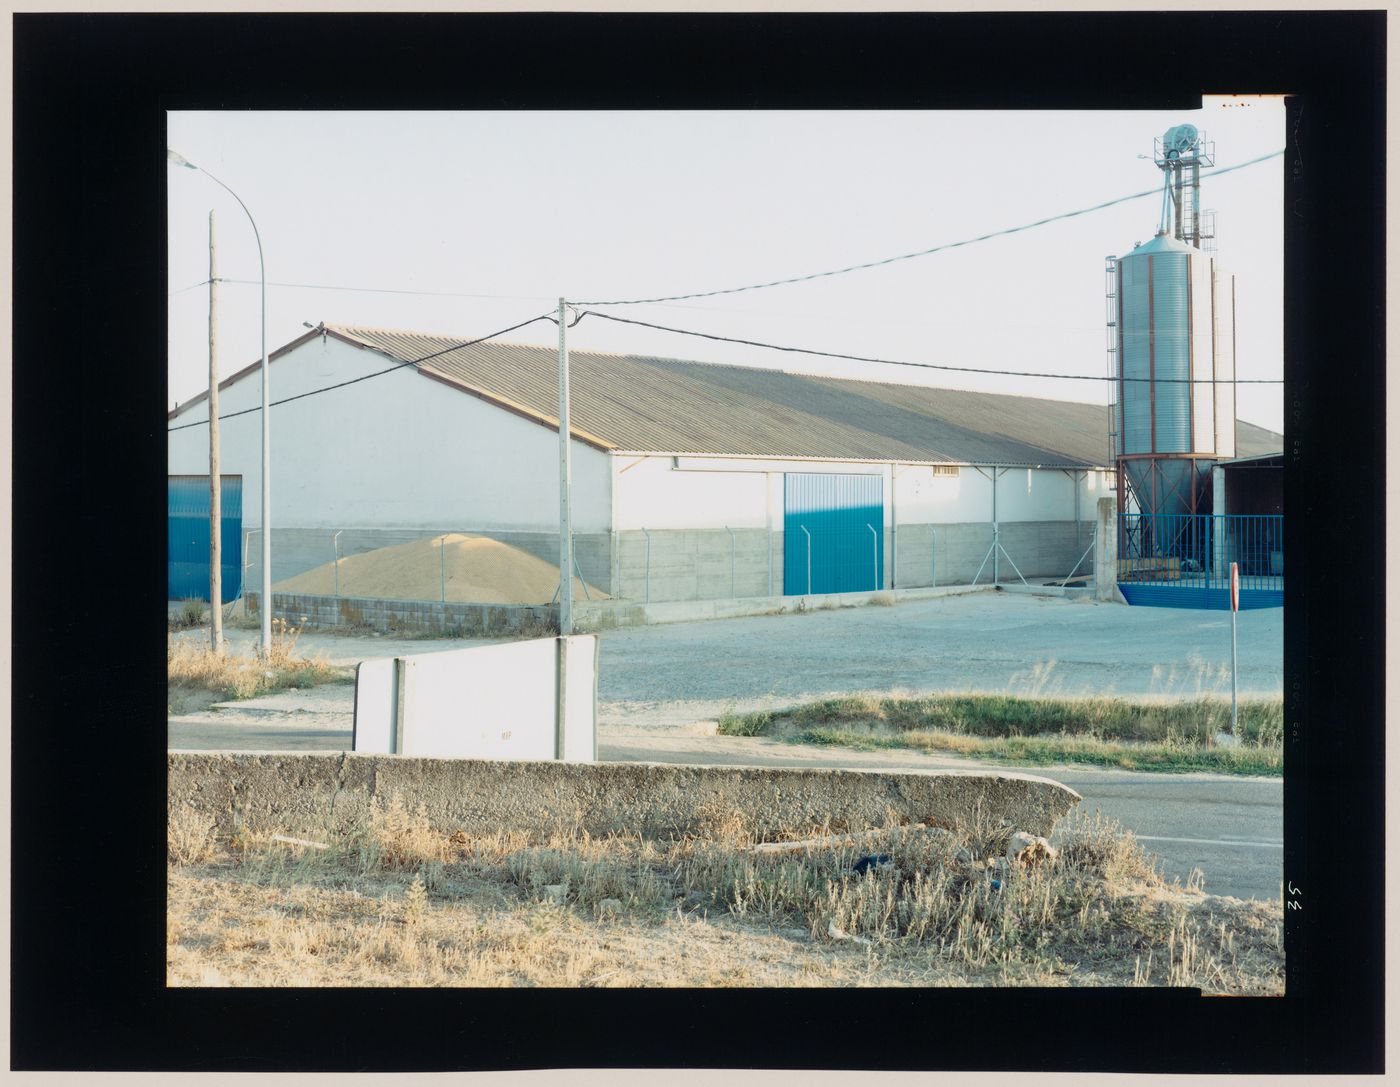 View of an agricultural building and a hopper, Castrojeriz, Burgos Province, Spain (from the series "In between cities")